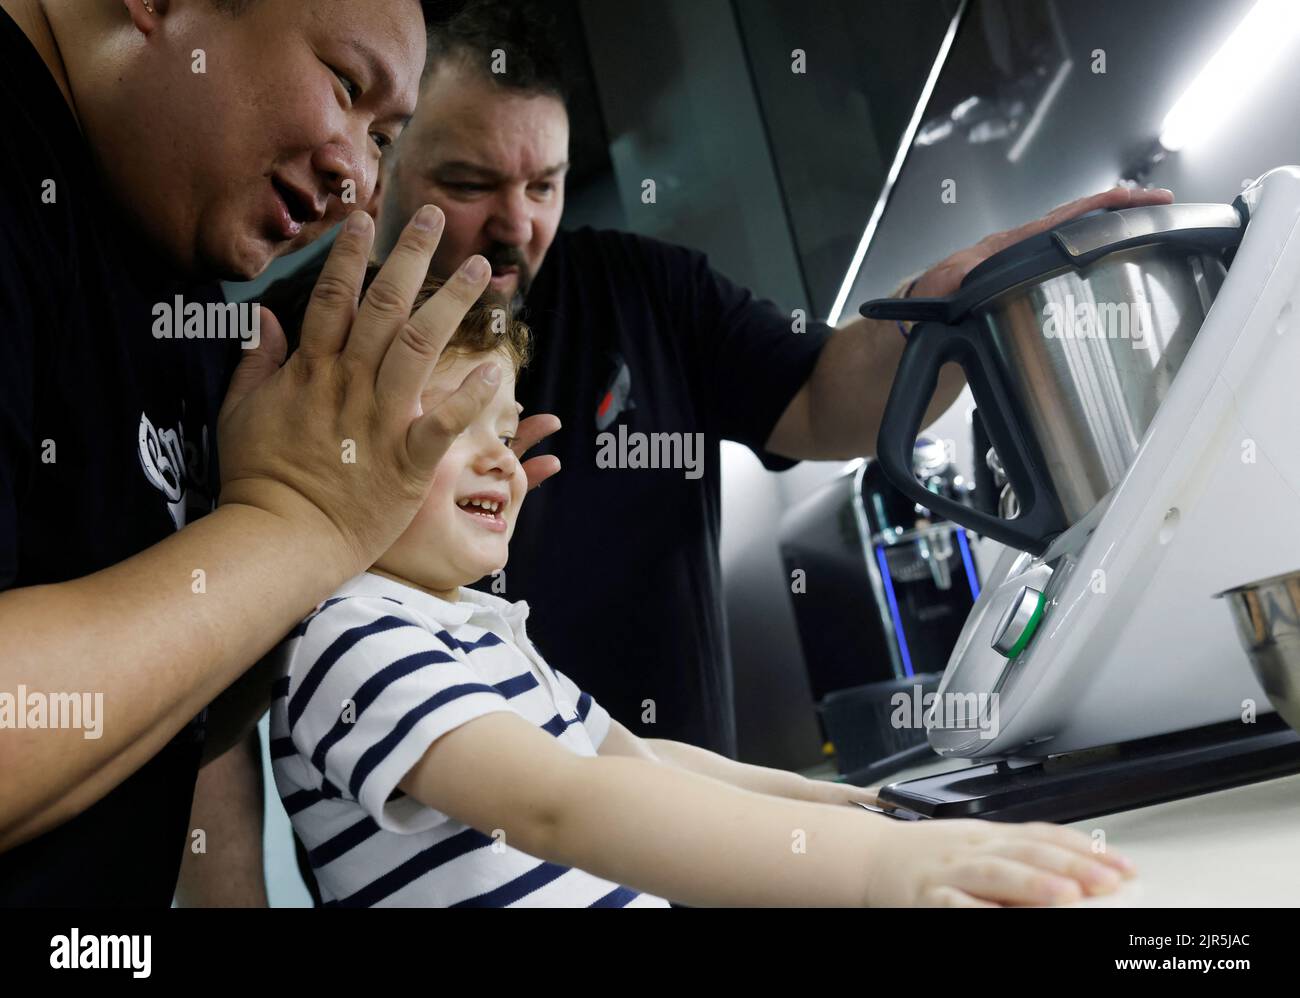 Same-sex parents Andre Ling, 44, and Cameron Sutherland, 47, cover their two year old son Tyler's ears as they crush rock sugar to make lemonade in a Thermomix machine at home in Singapore, August 22, 2022. REUTERS/Edgar Su Stock Photo